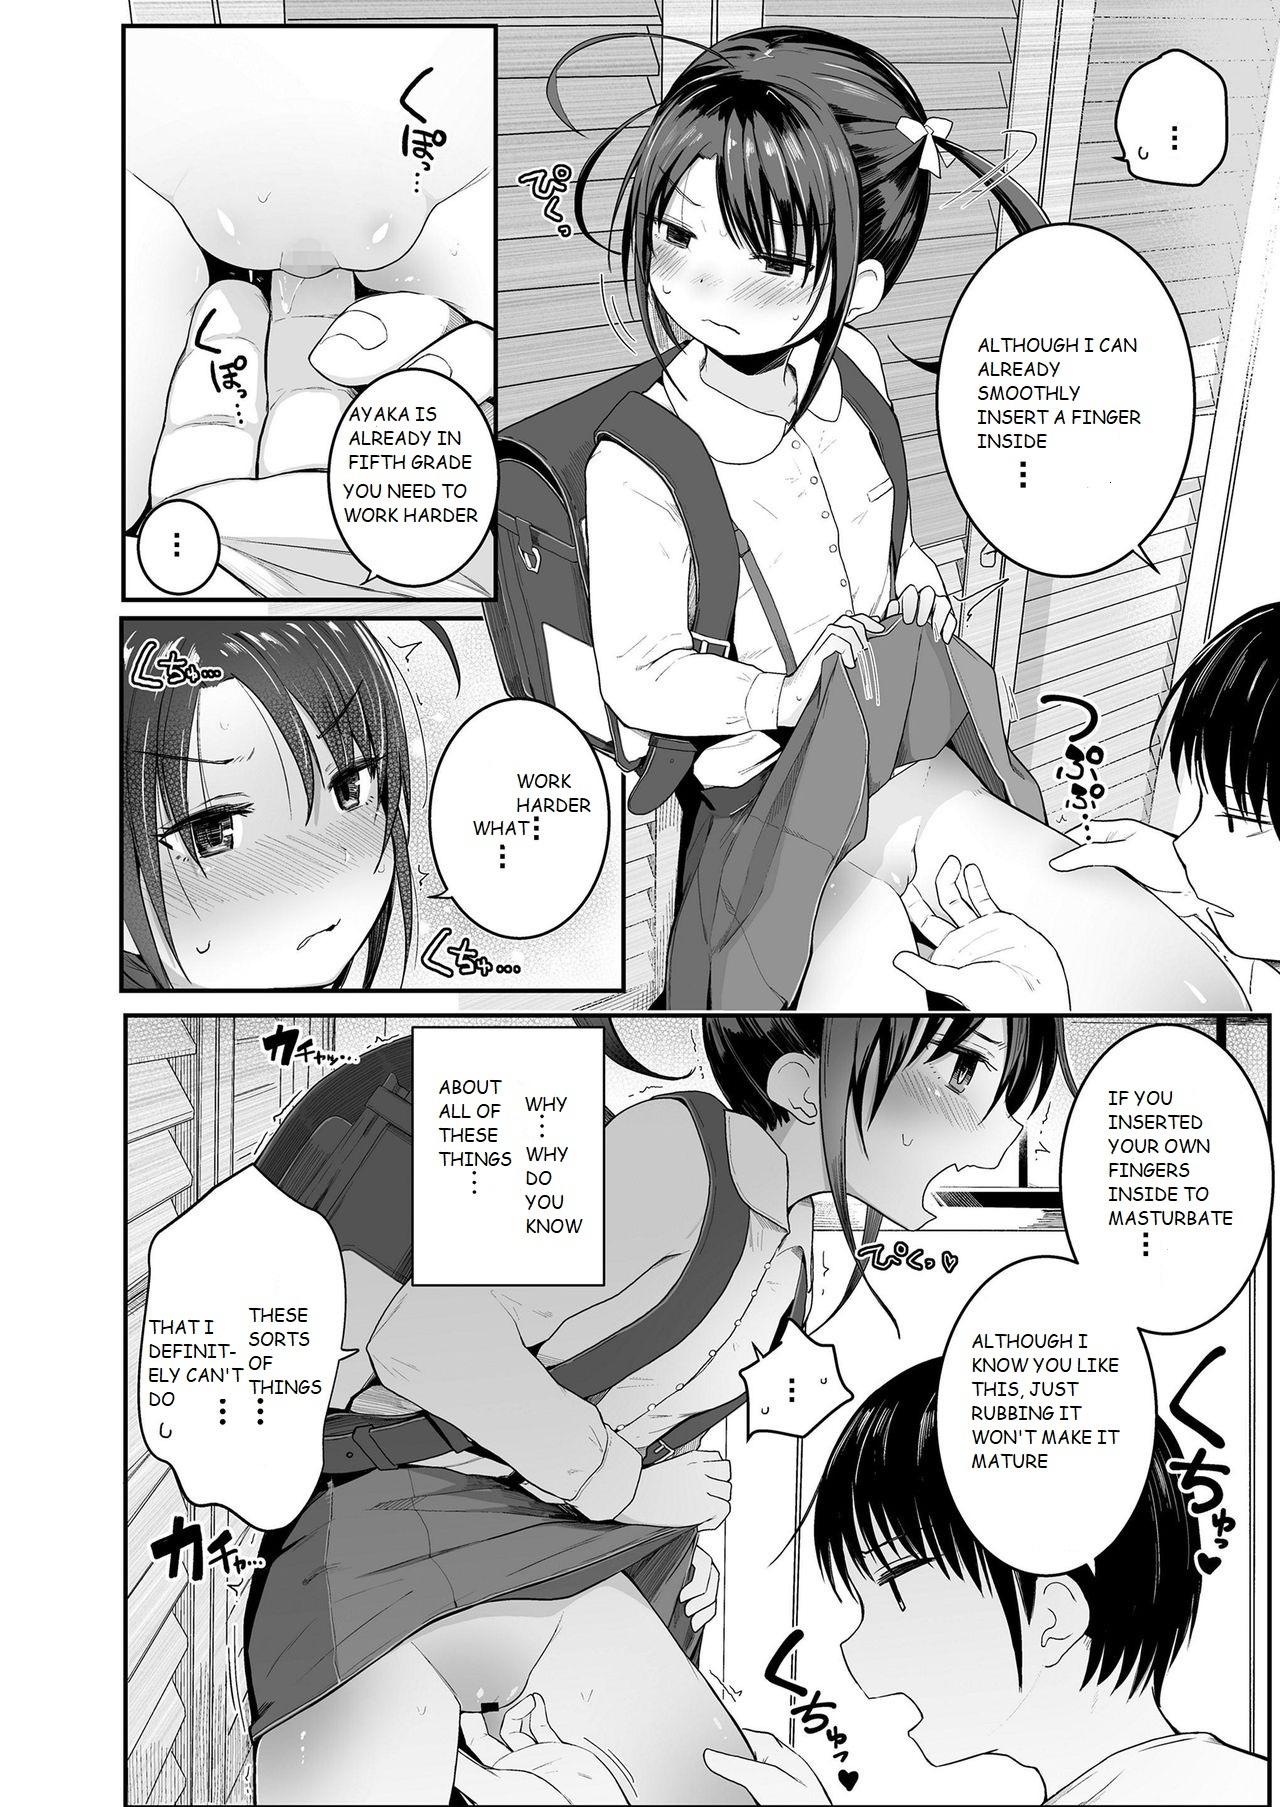 Best Blowjob Imouto no Himitsu... | My Little Sister's Secret... Teensex - Page 4